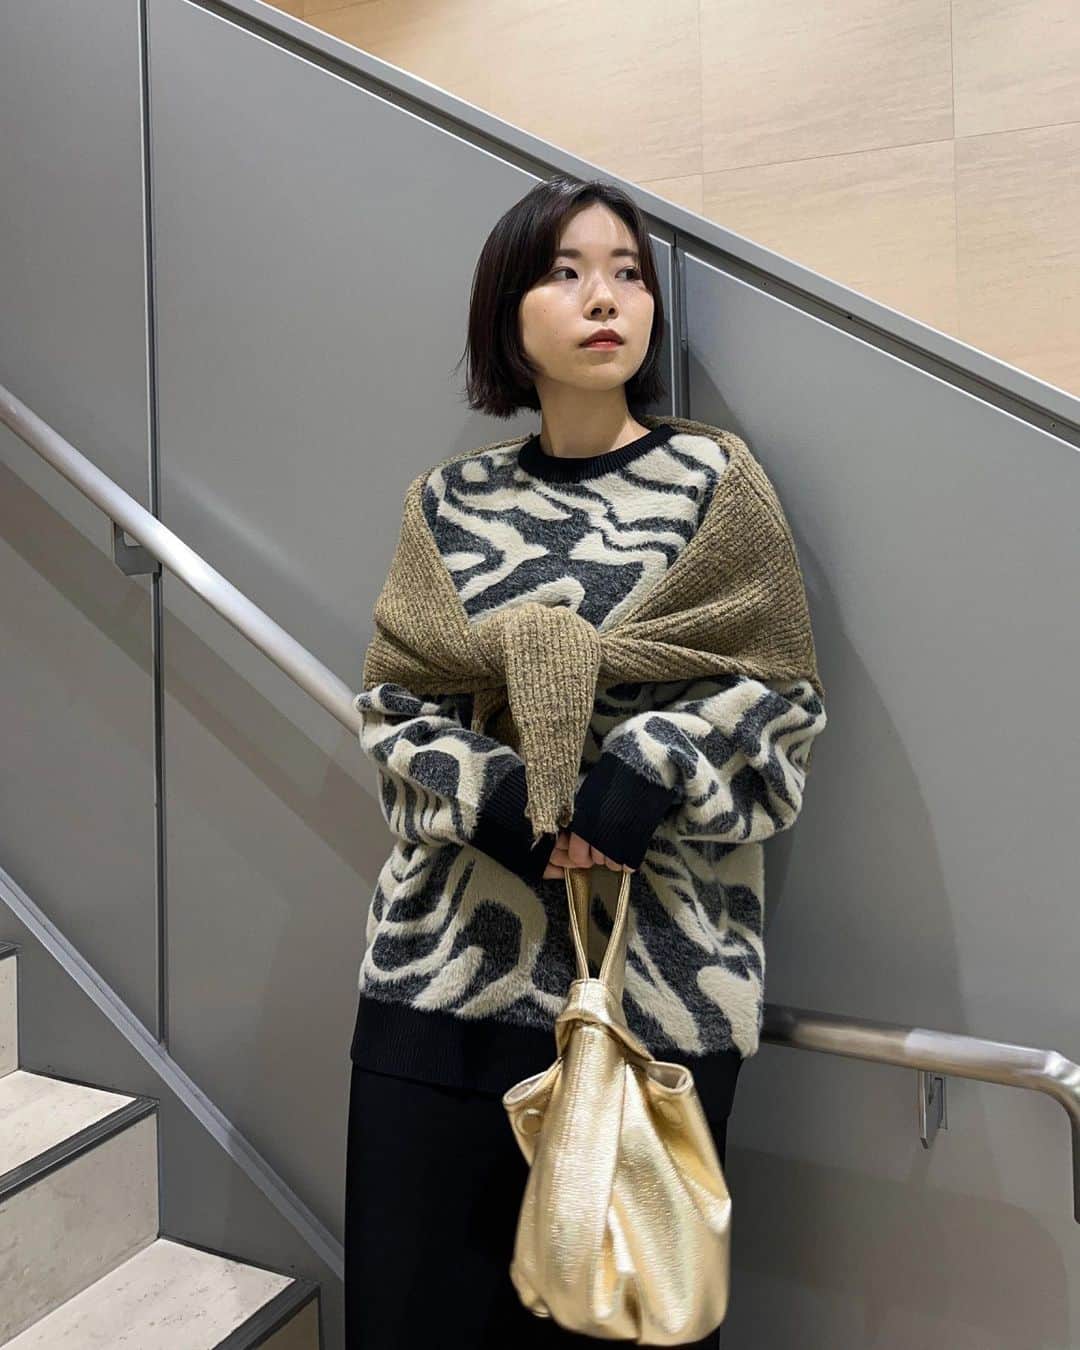 SHEL’TTERのインスタグラム：「ㅤㅤㅤㅤㅤㅤㅤㅤㅤㅤㅤㅤㅤ ▶︎MEIKA from HAKATA HANKYU 【164㎝】 ━━━━━━━━━━━━━━━  ■WOOL MIX DAMAGE CROP C/D (SLY) ■MINKY JQ PATTERN TOPS (SLY) ■SATIN MAXI TIGHT SKIRT (MOUSSY) ■ROUND TYPE ONEHANDLE (SHEL'TTER SELECT)  ¥6,490(tax in) ■CHUNKY SOLE KNIT SNEAKERS (SHEL'TTER SELECT) ¥26,400(tax in)  ※店舗により取り扱いアイテムや入荷状況が異なります。お近くのSHEL'TTER店舗までお問い合わせ下さいませ。  ━━━━━━━━━━━━━ #SHELTTER #TheSHELTTERTOKYO #SHOPSTAFF #SHELTTERSELECT #SLY #MOUSSY #MOUSSY」